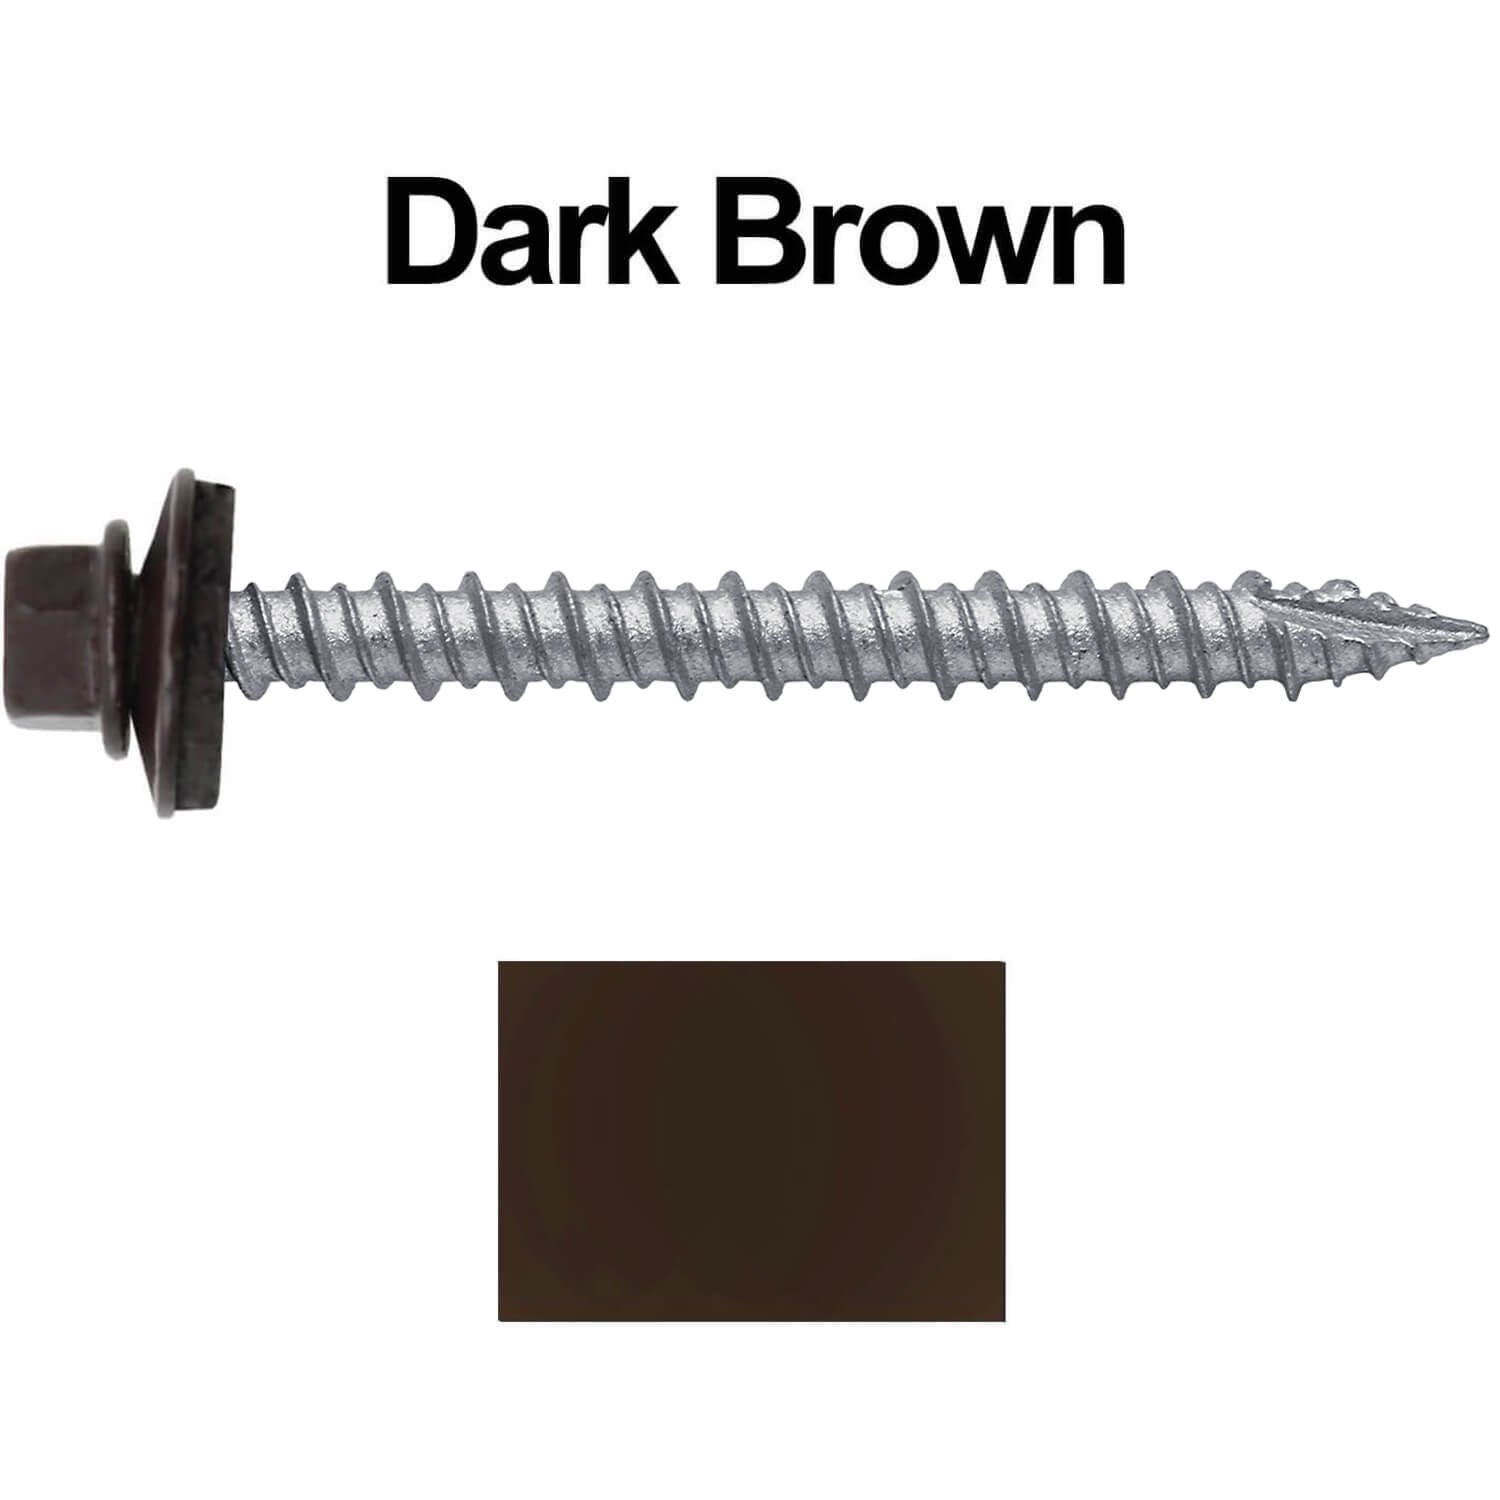 Screws x 2-1/2 Dark Brown Hex Washer Head Sheet Metal Roof Screw 250 #10 Metal Roofing Screws: Self Starting/Tapping EPDM Washer Colored Head for Corrugated Roofing 